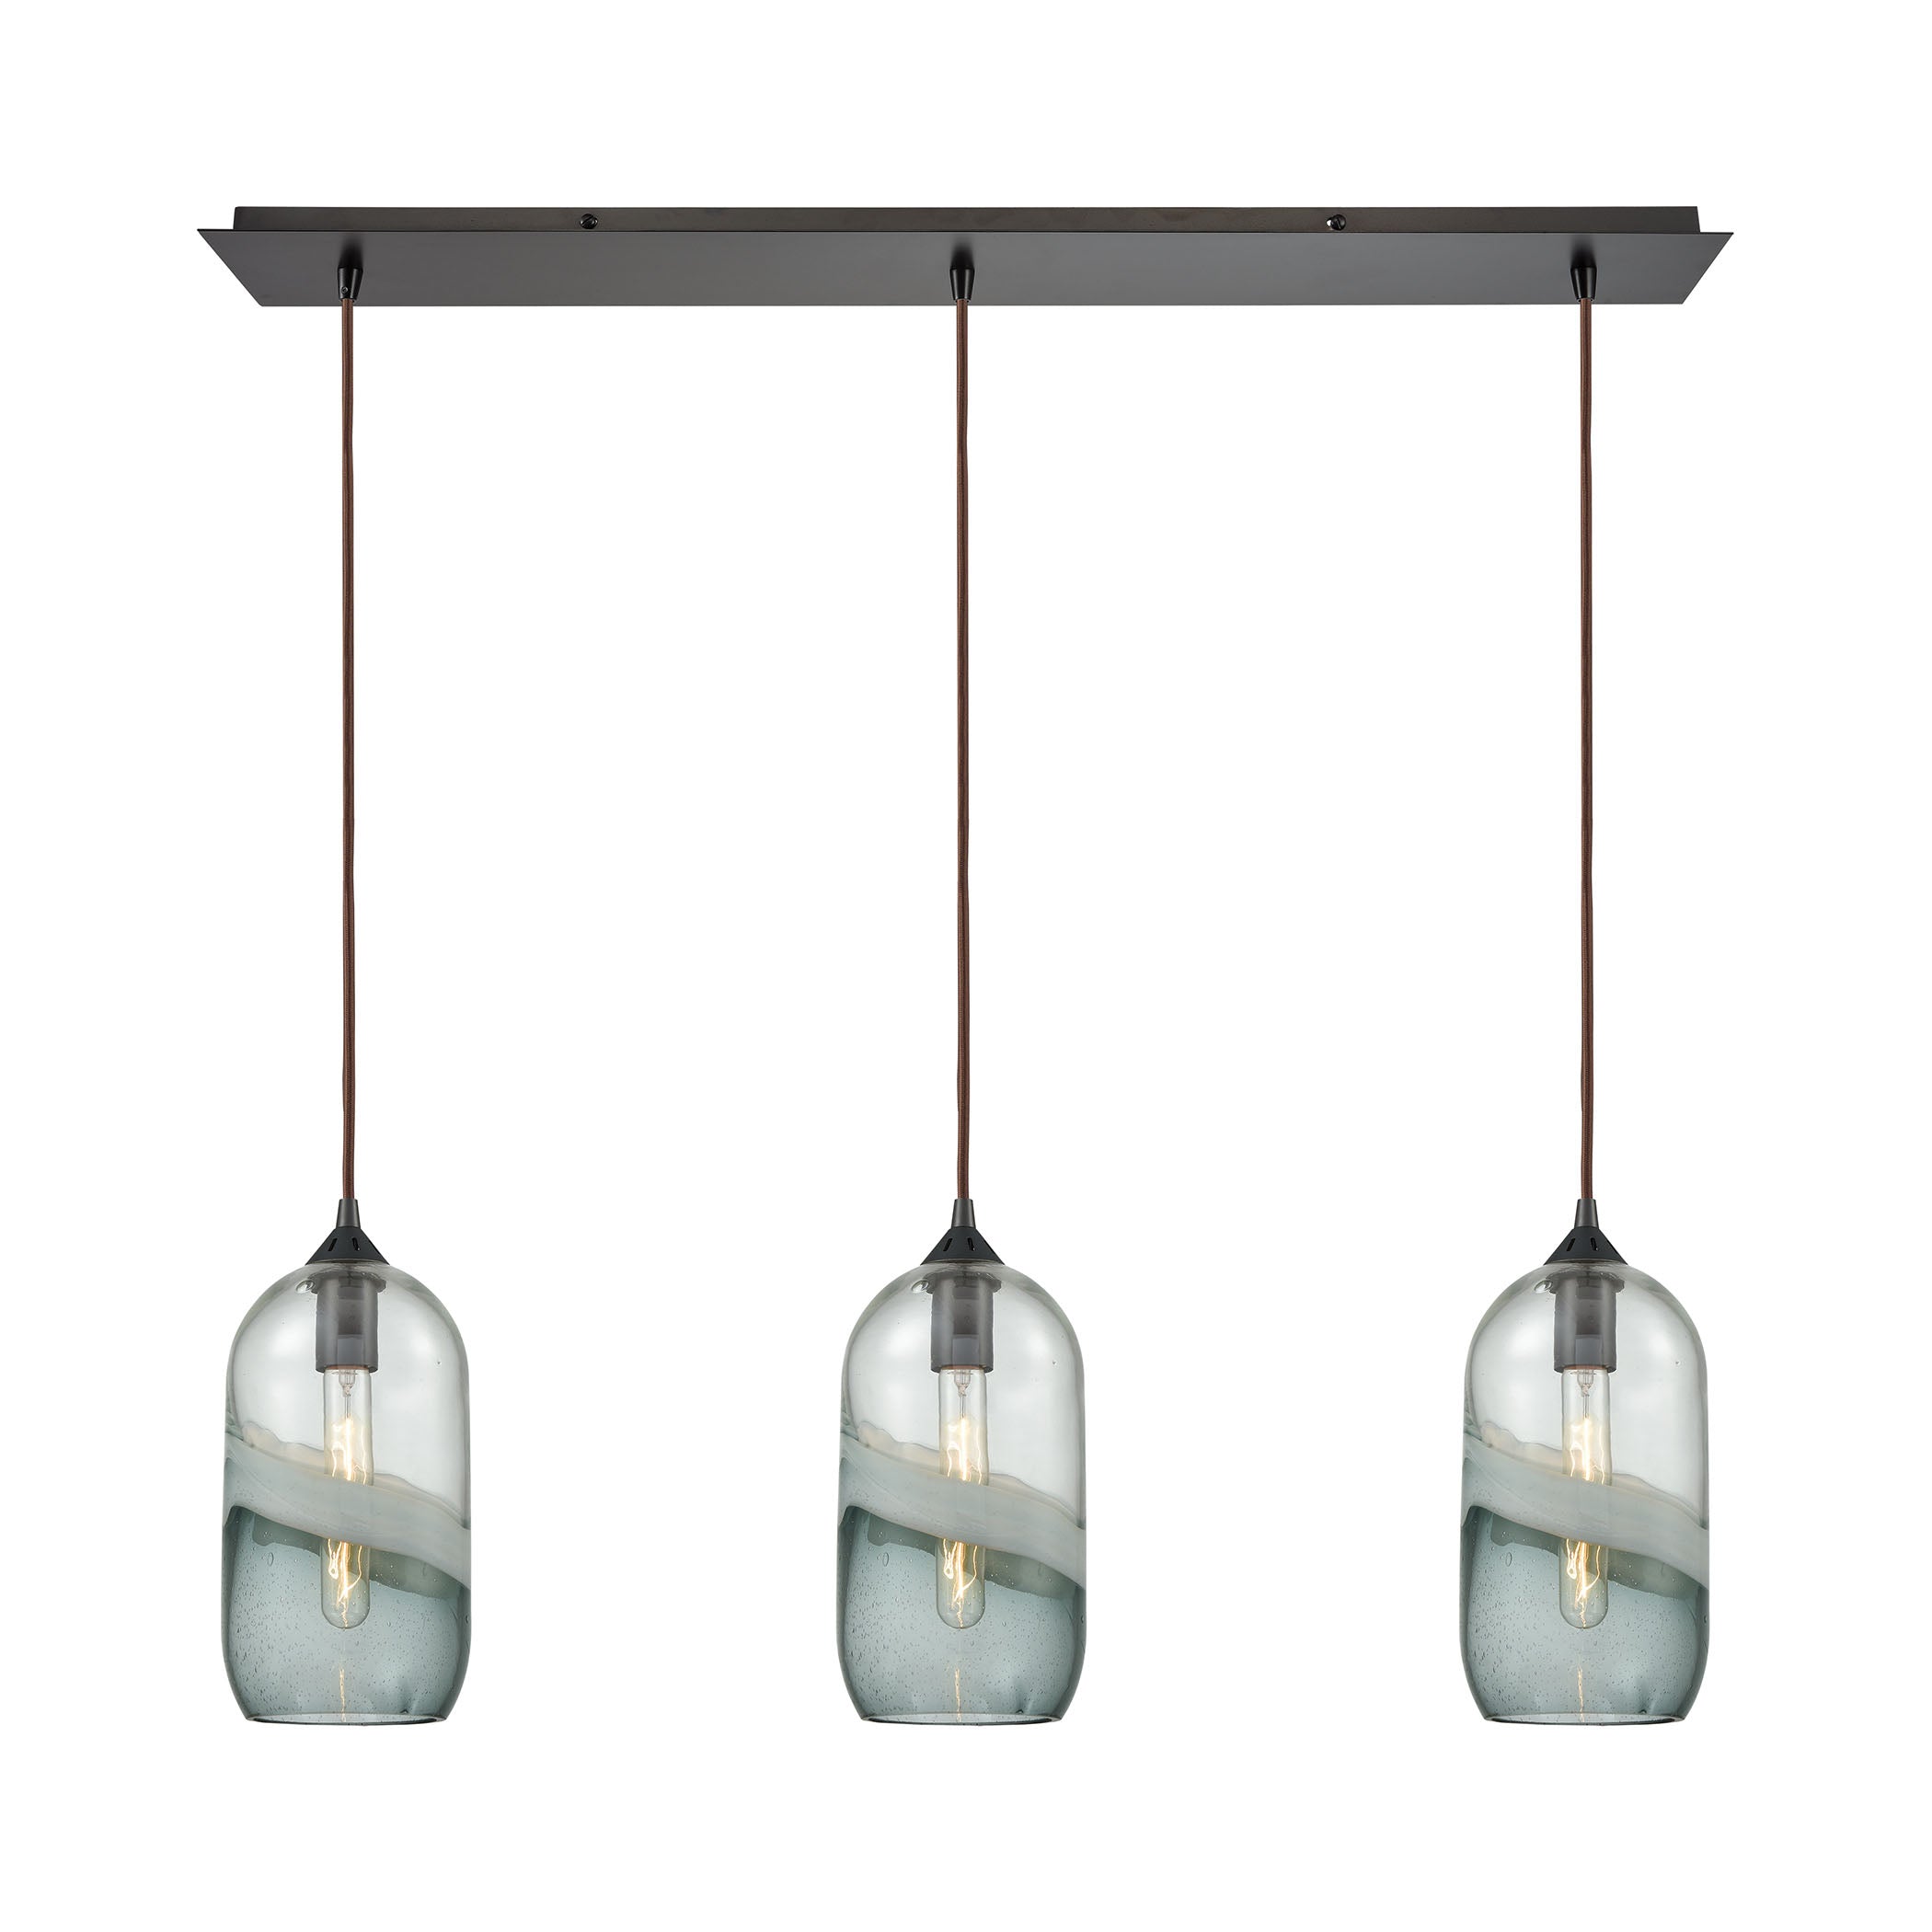 ELK Lighting 25102/3LP Sutter Creek 3-Light Linear Mini Pendant Fixture in Oiled Bronze with Clear and Smoke Seedy Glass